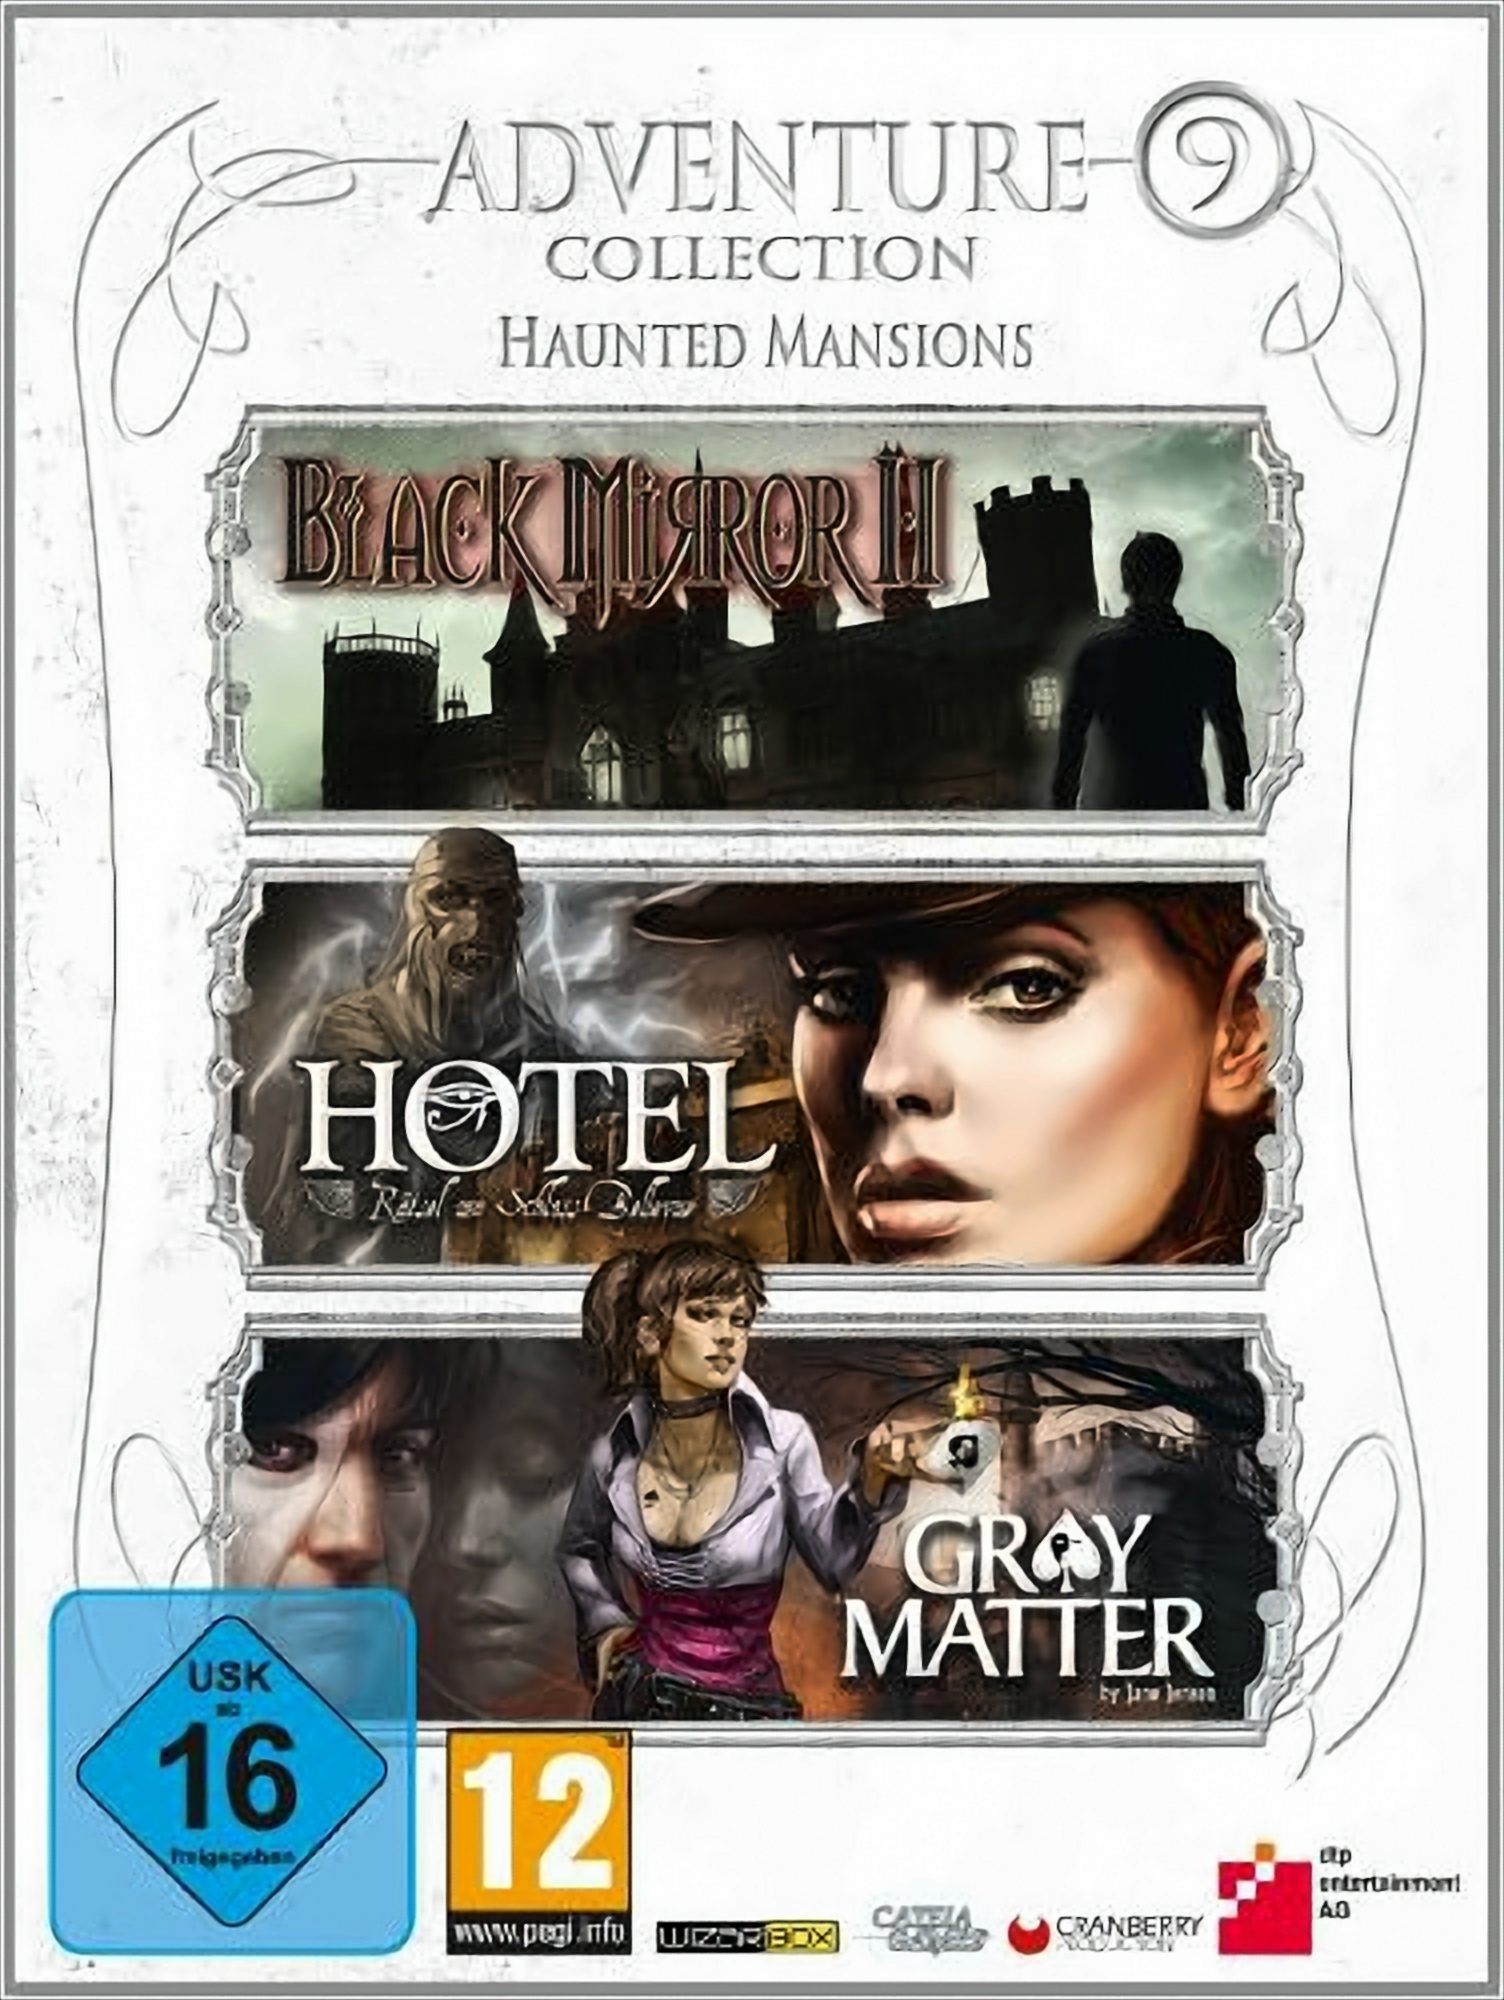 - Adventure - Haunted [PC] Collection Mansions 9